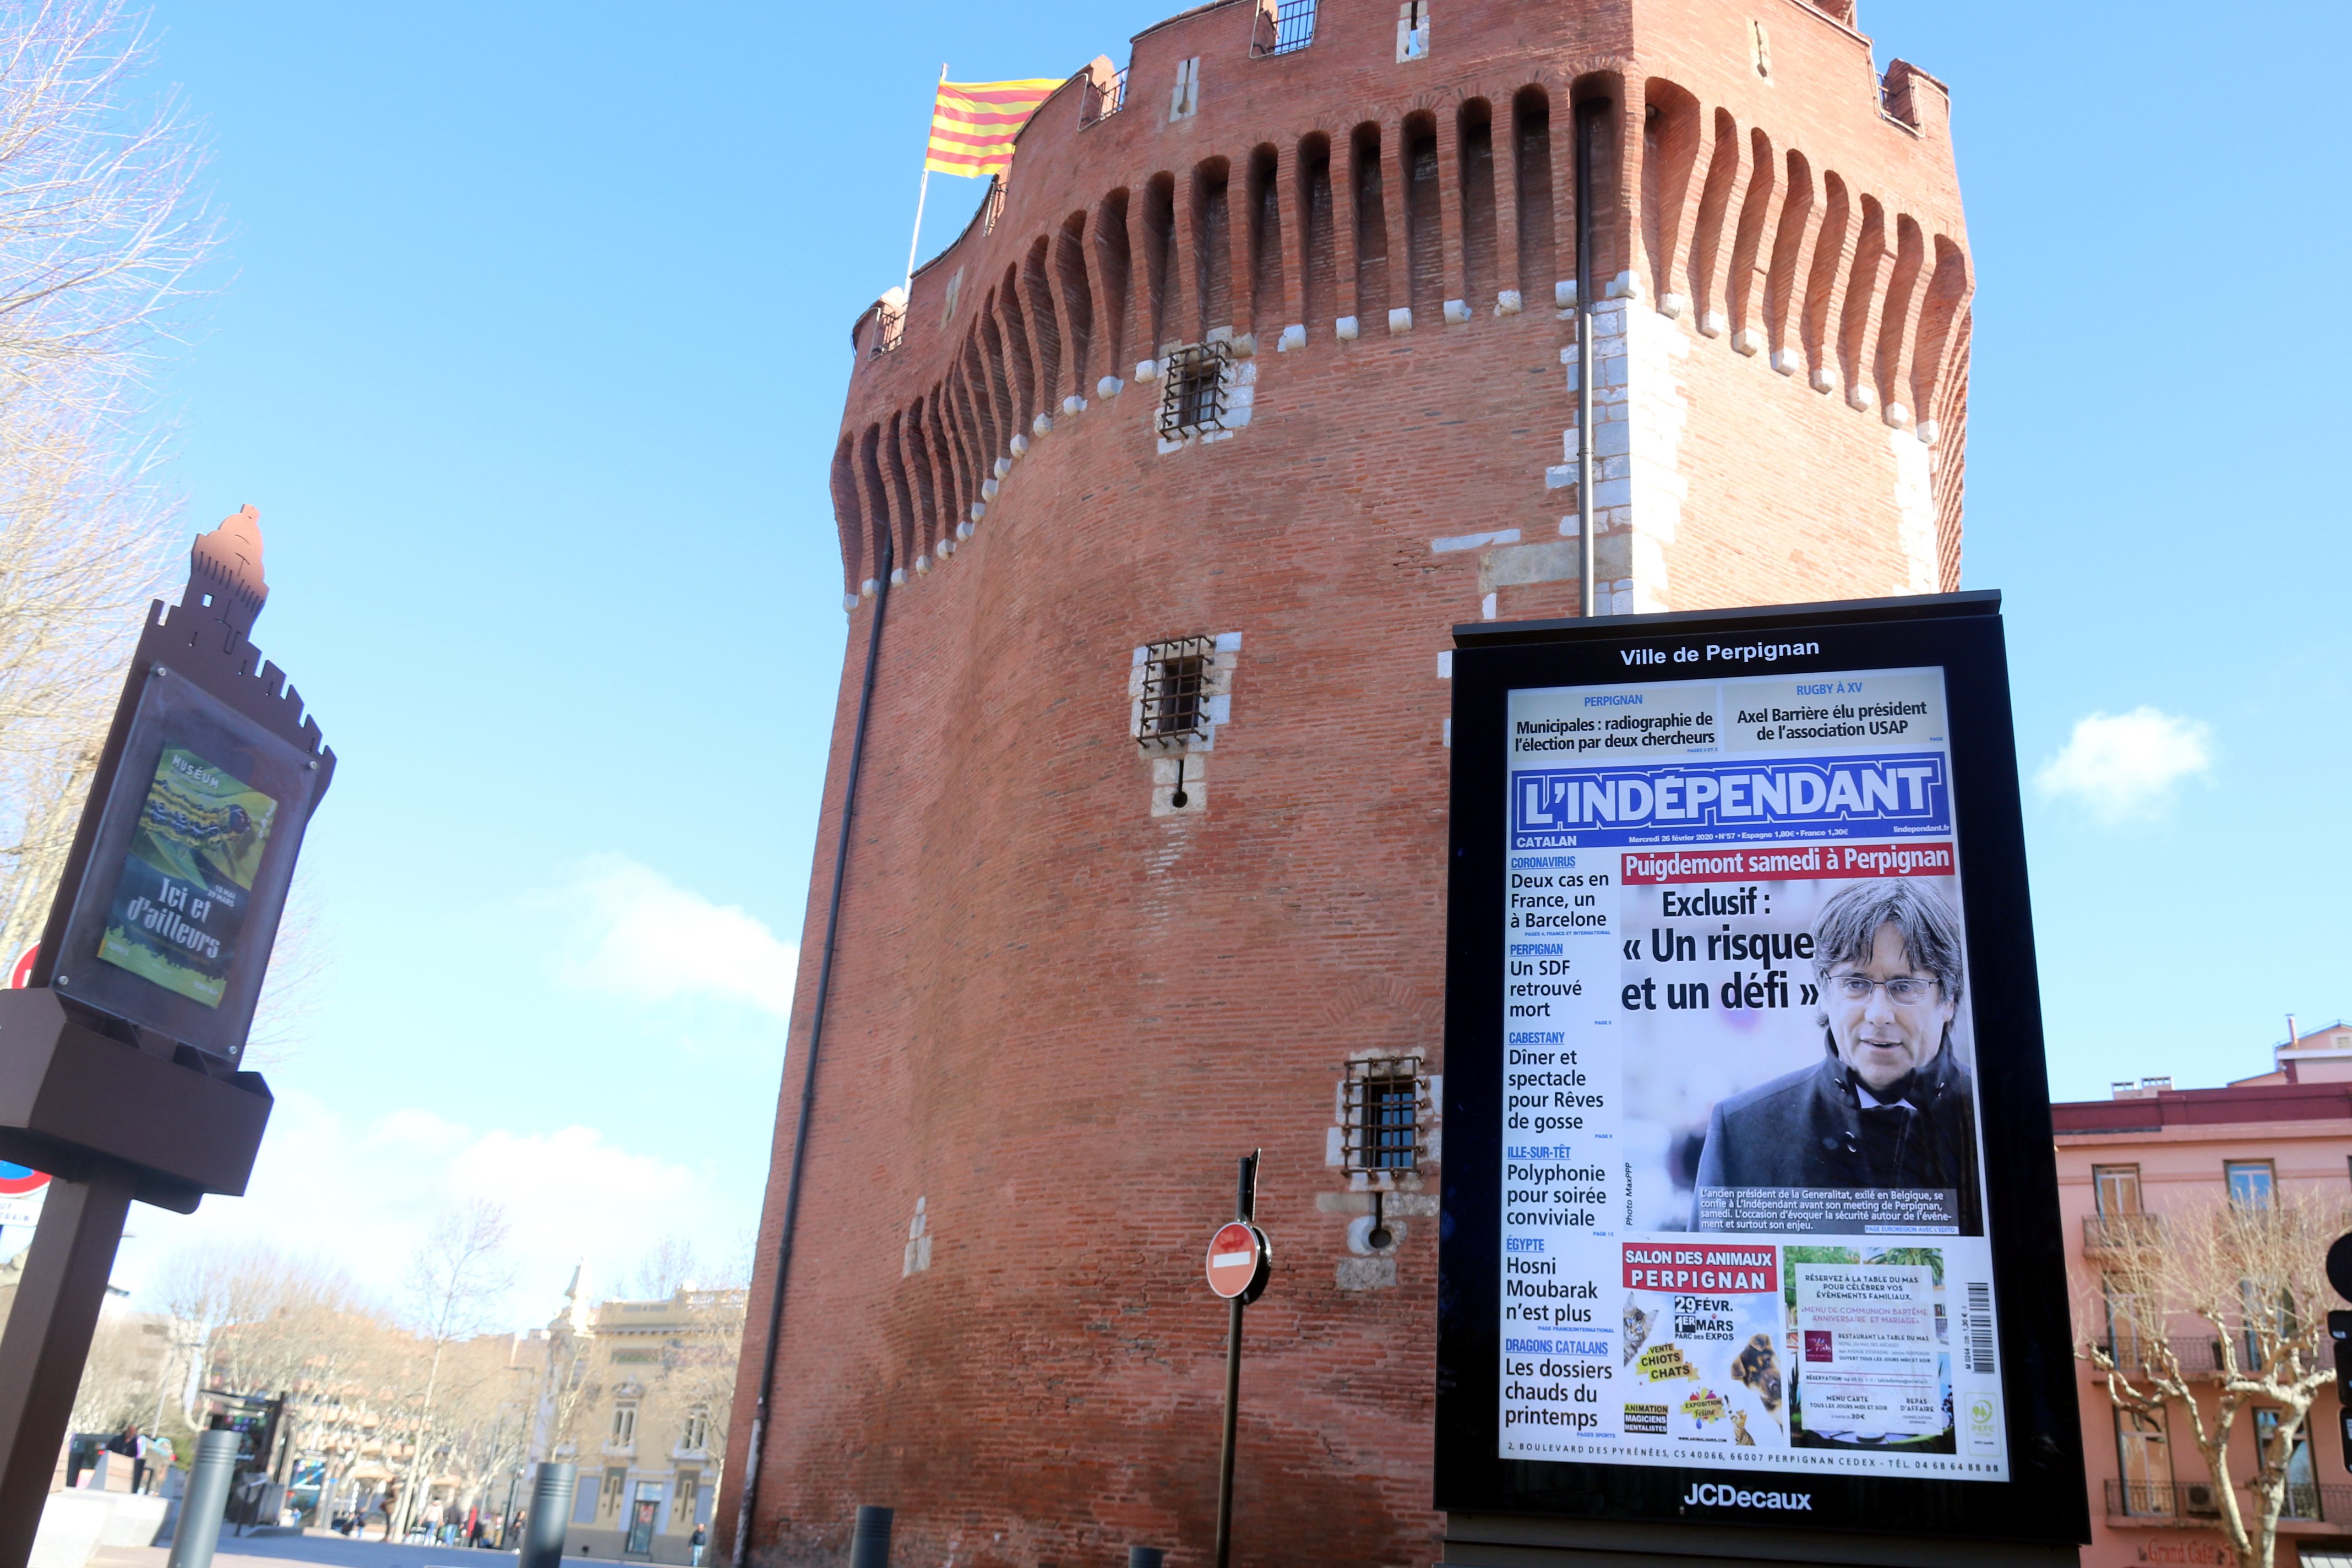 Perpinyà expects more than 70,000 people for Puigdemont event on Saturday